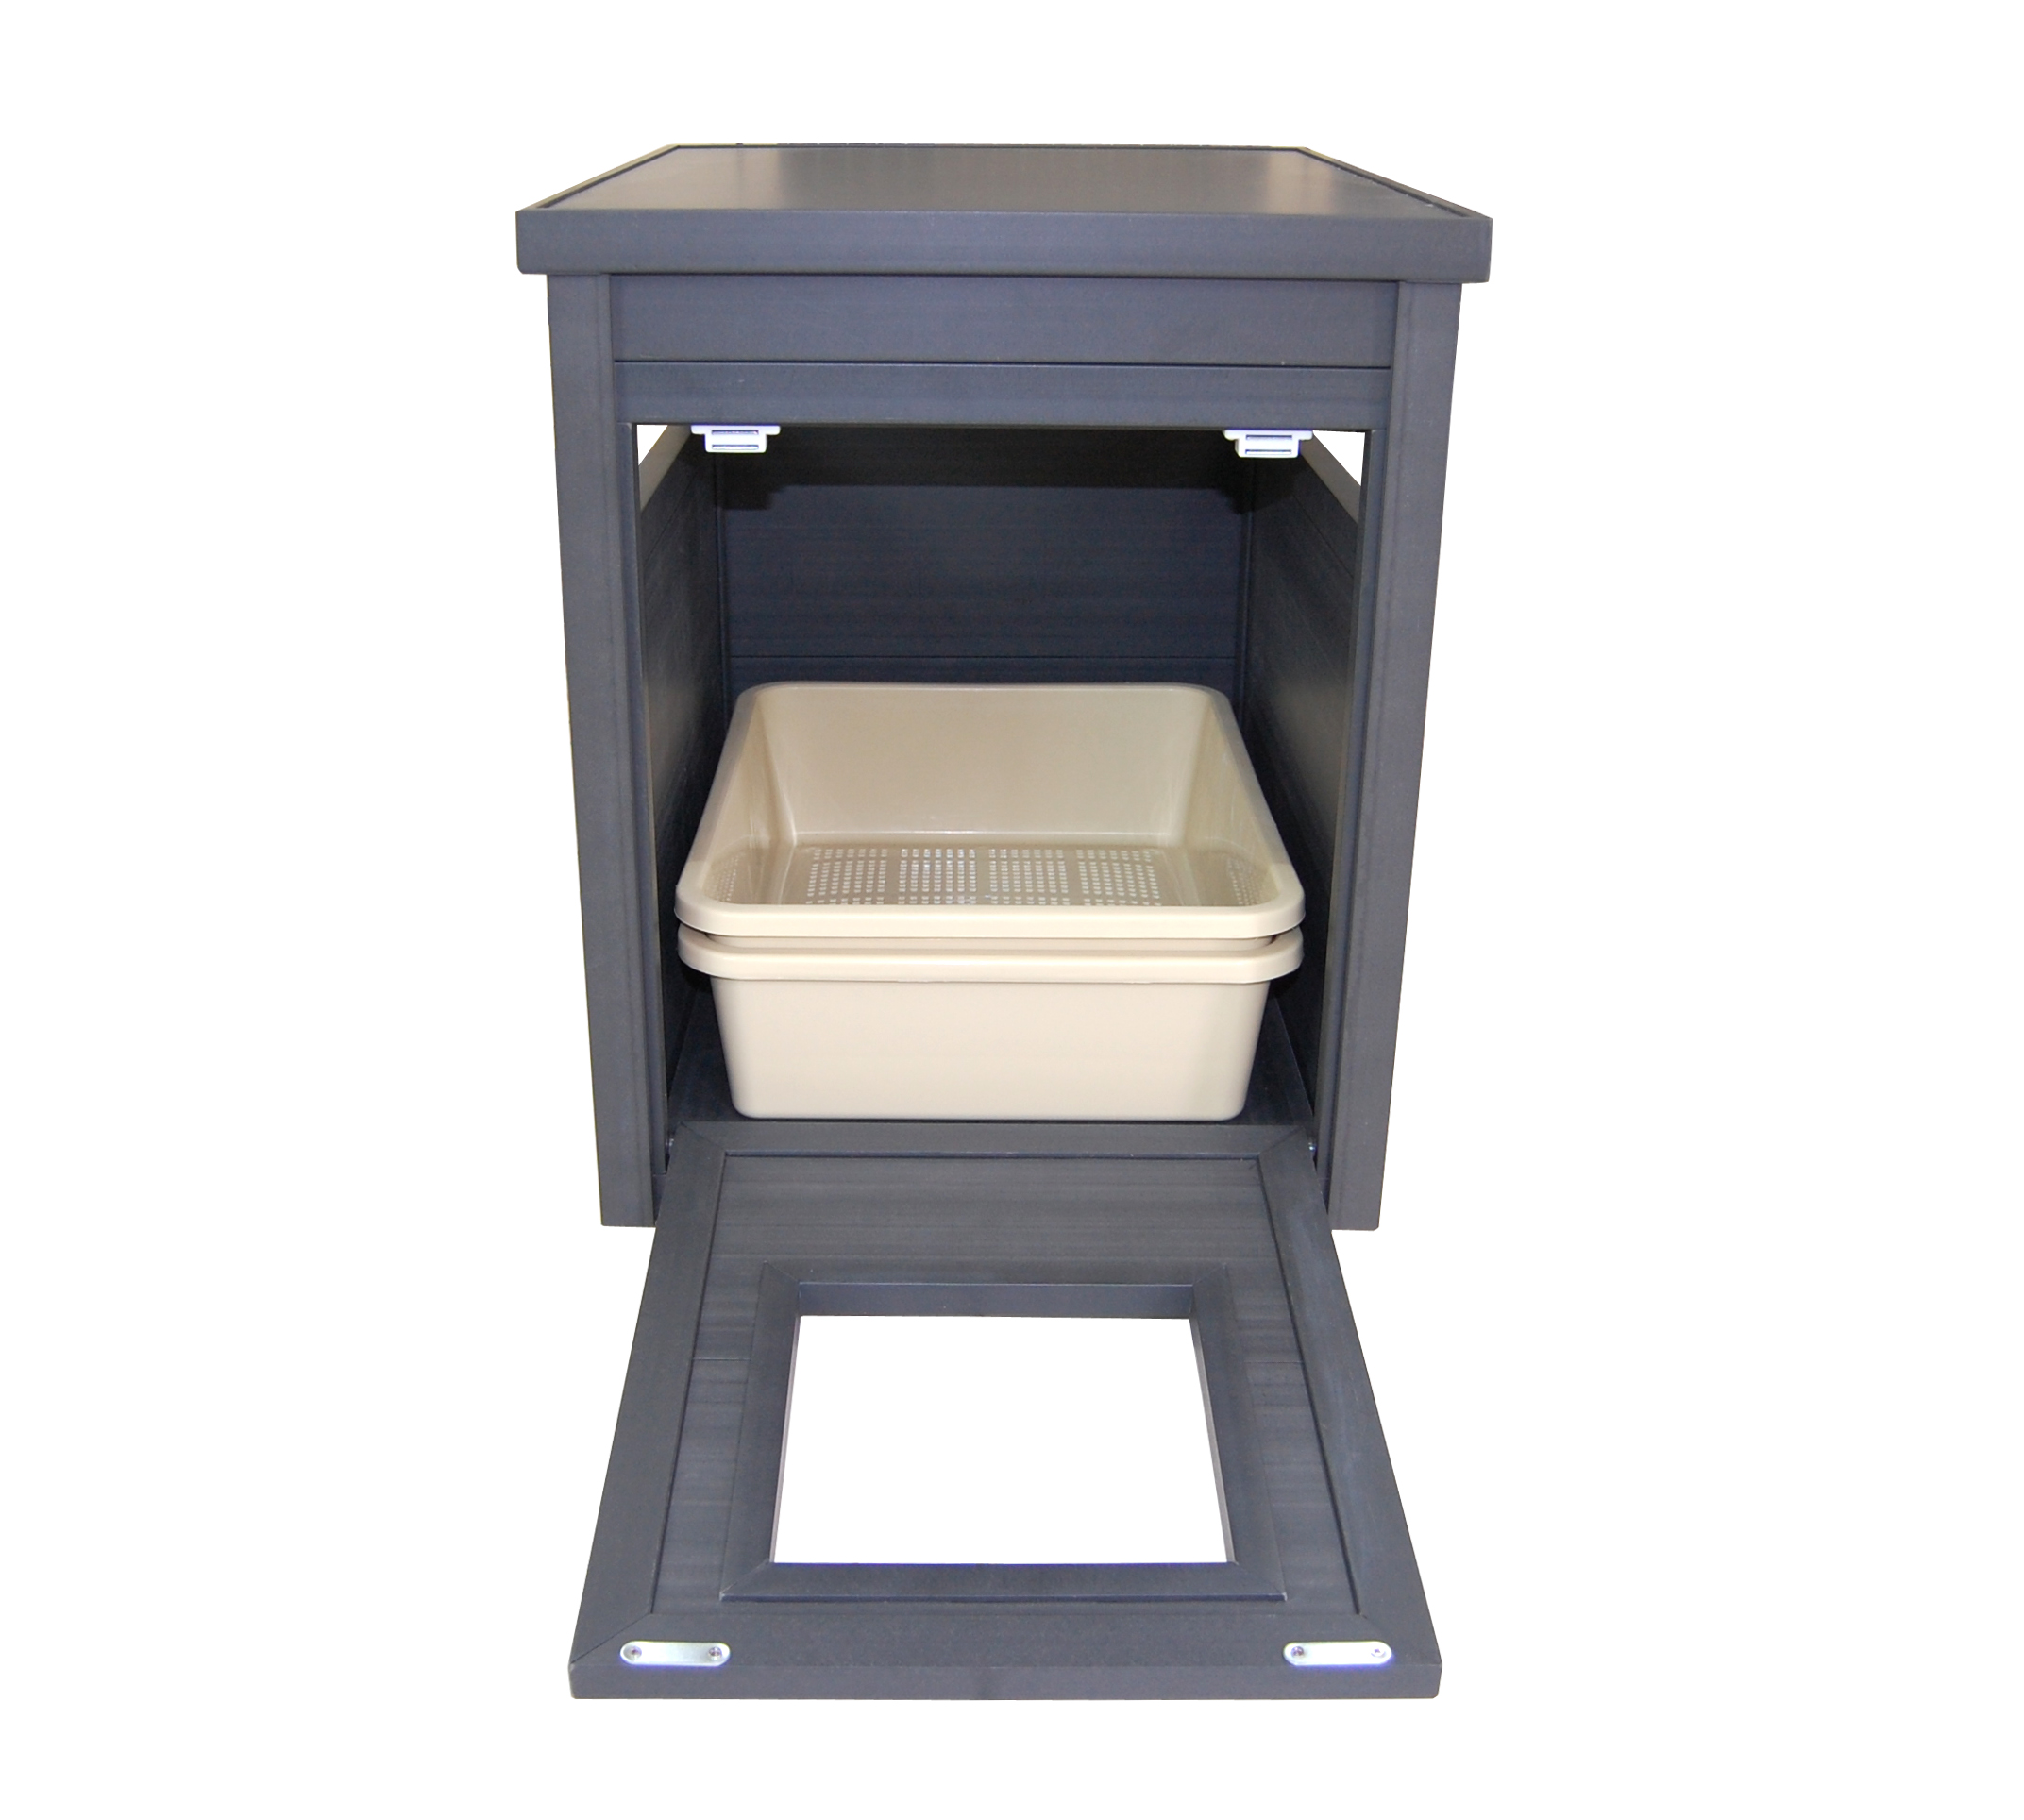 New Age Pet ecoFlex Litter Loo Litter Box Cover/End Table EHLB801-02